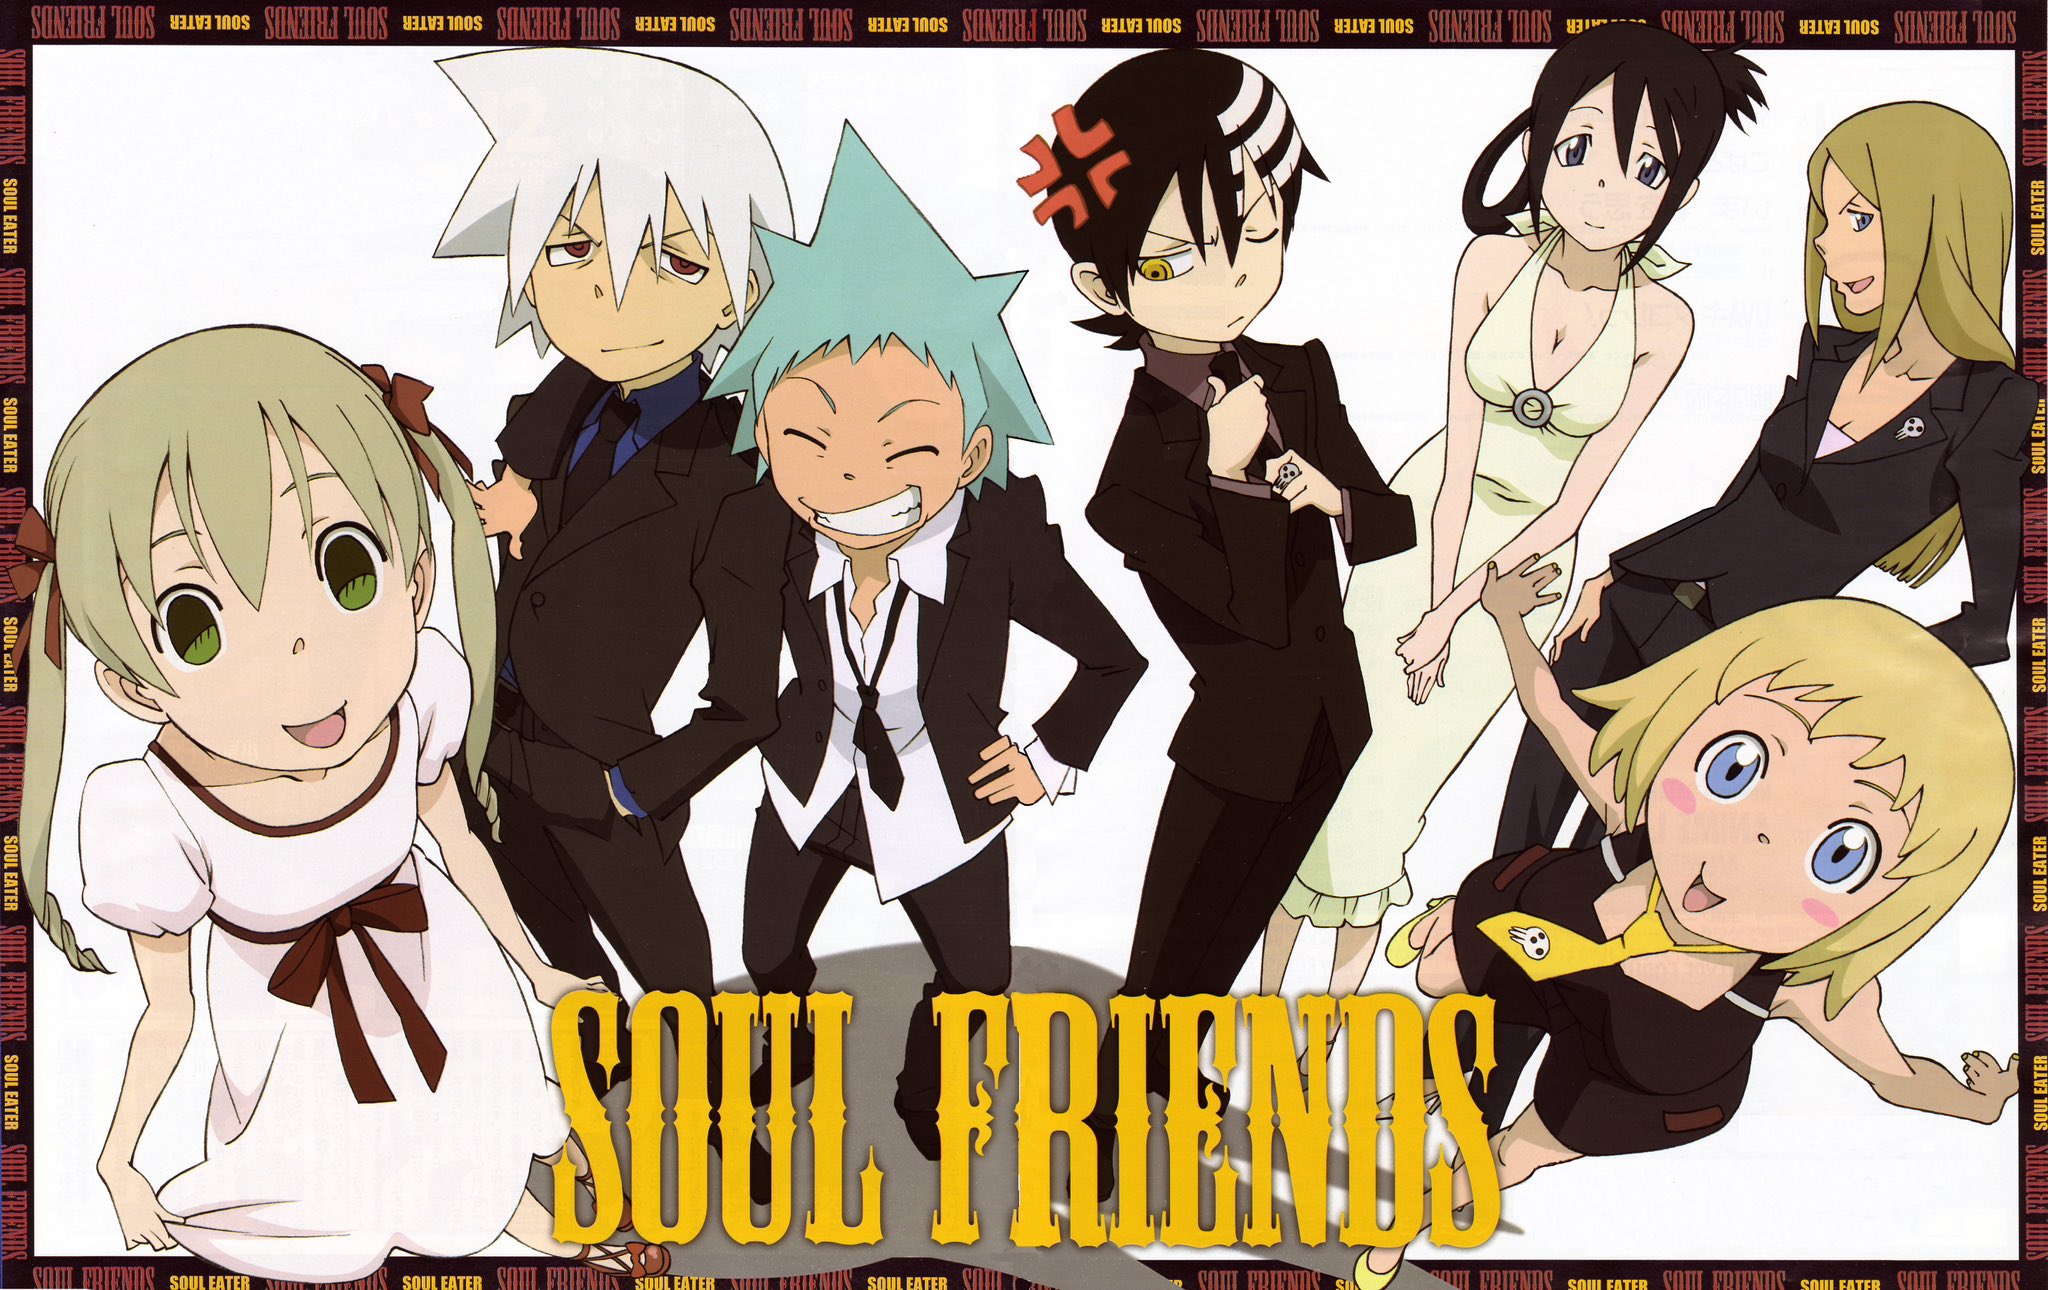 Is a Soul Eater Reboot Confirmed? on X: Day 3,527 There is no